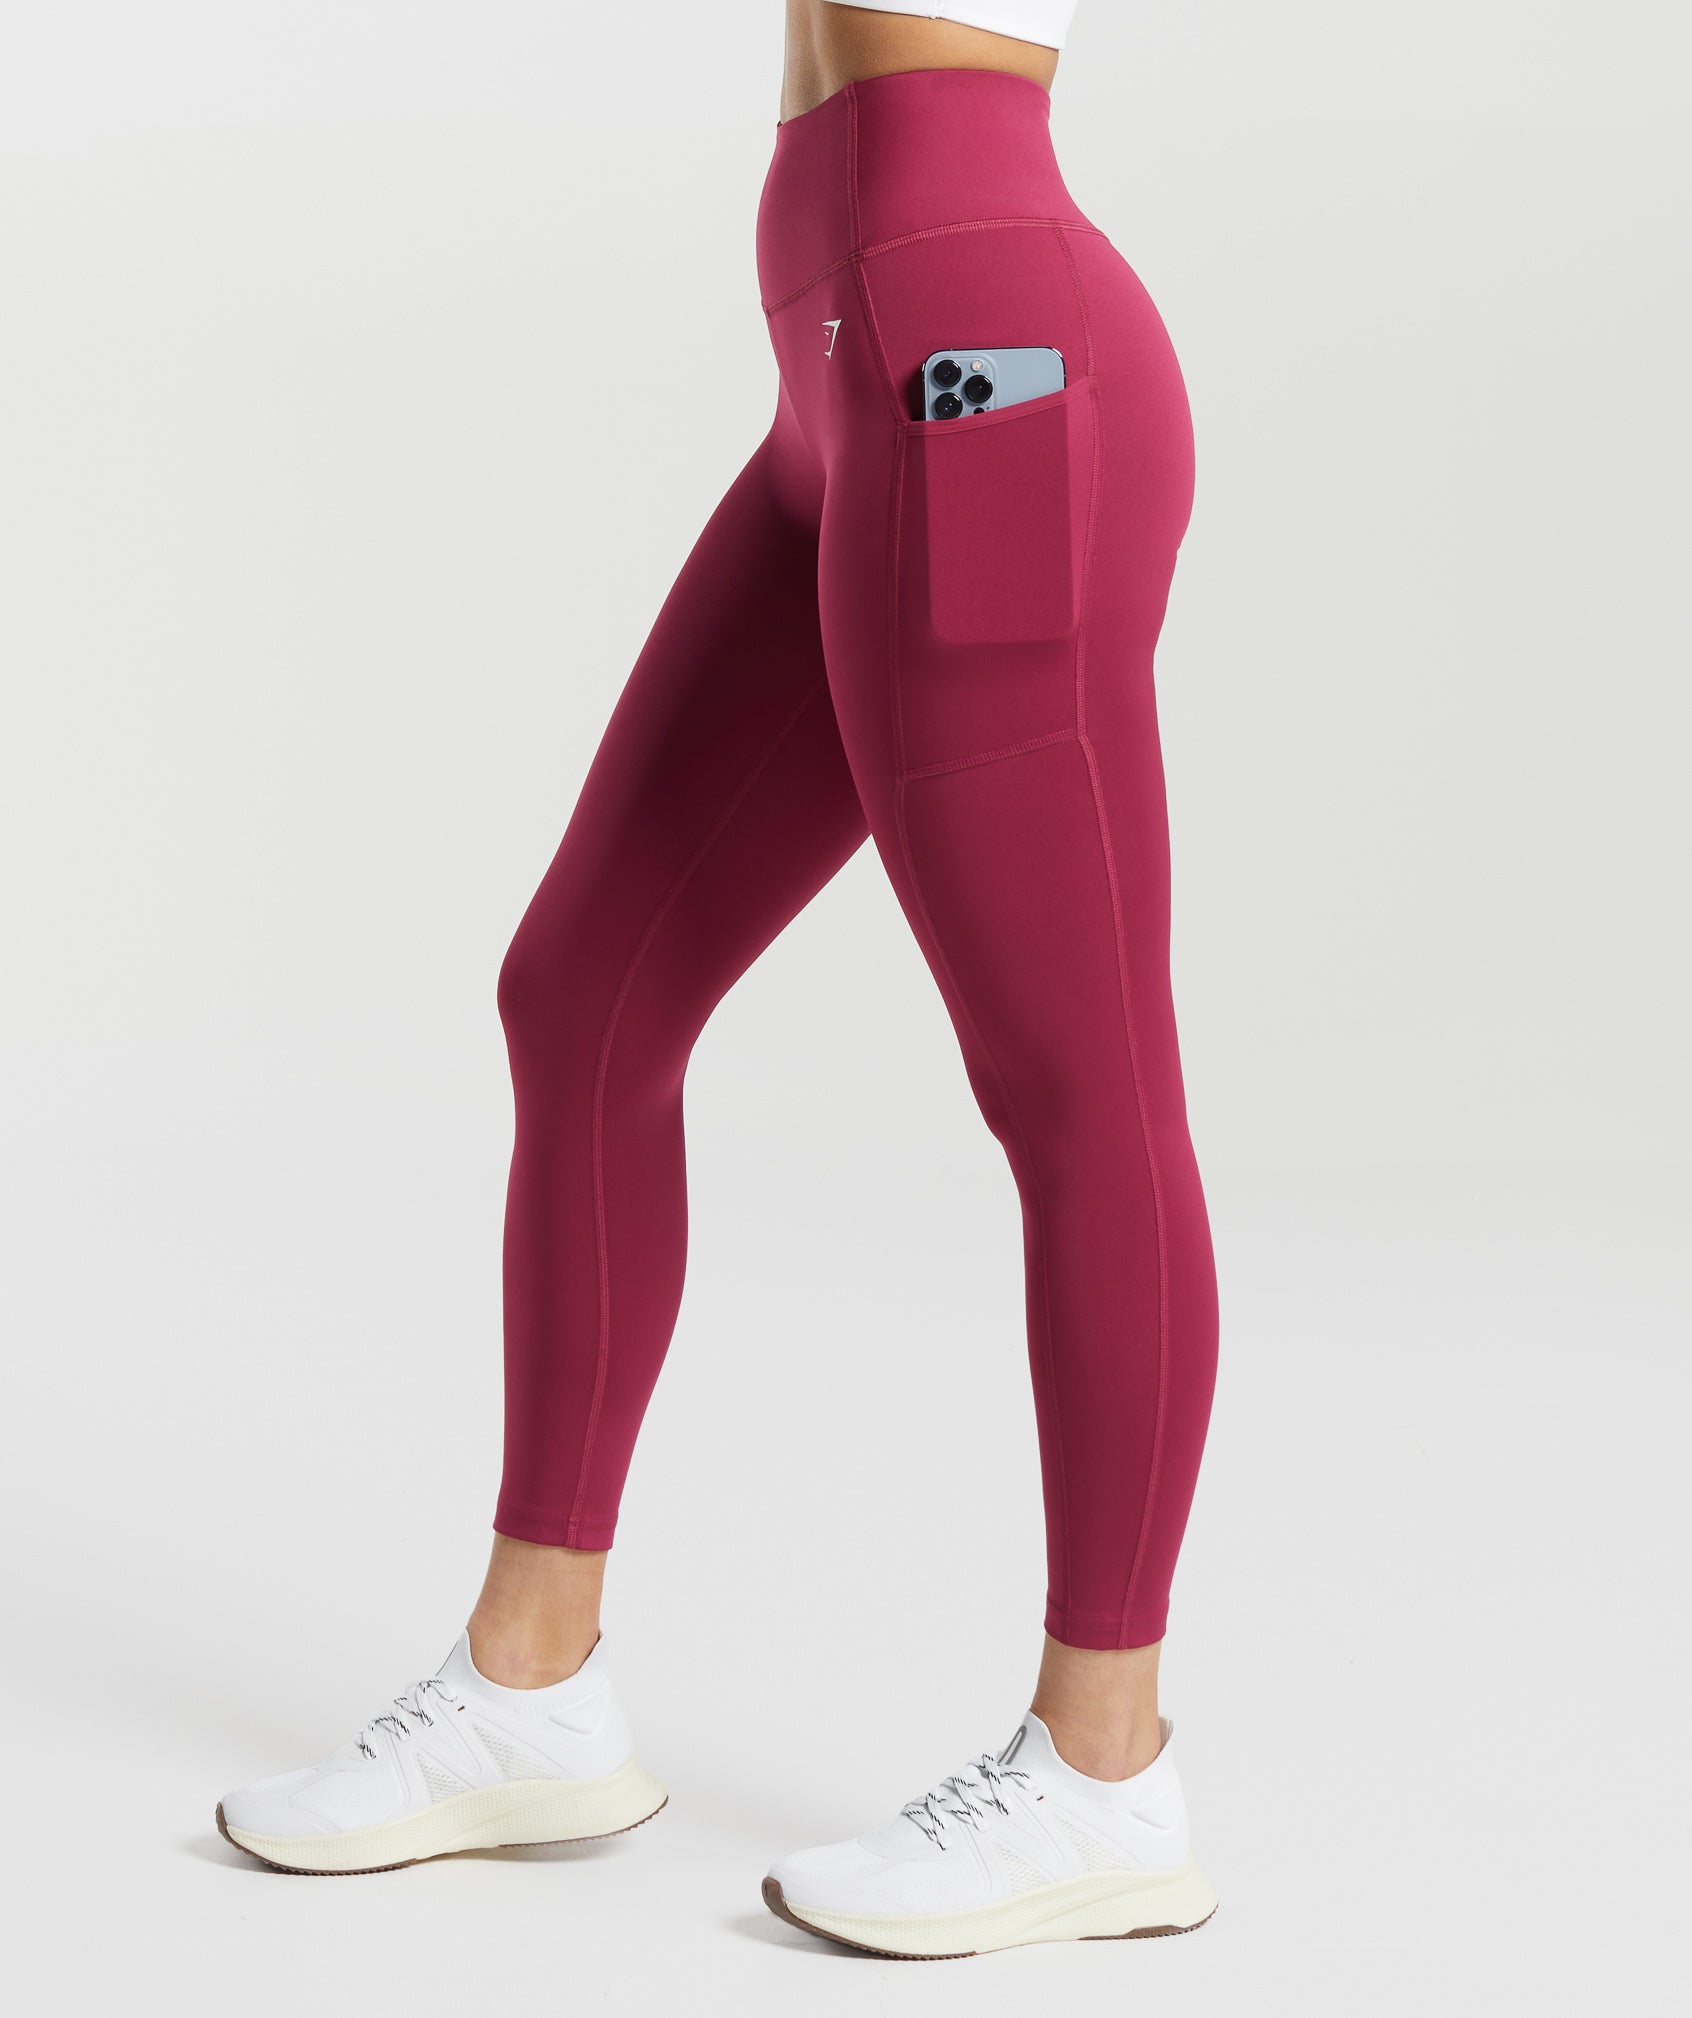 Pocket Leggings in {{variantColor} is out of stock